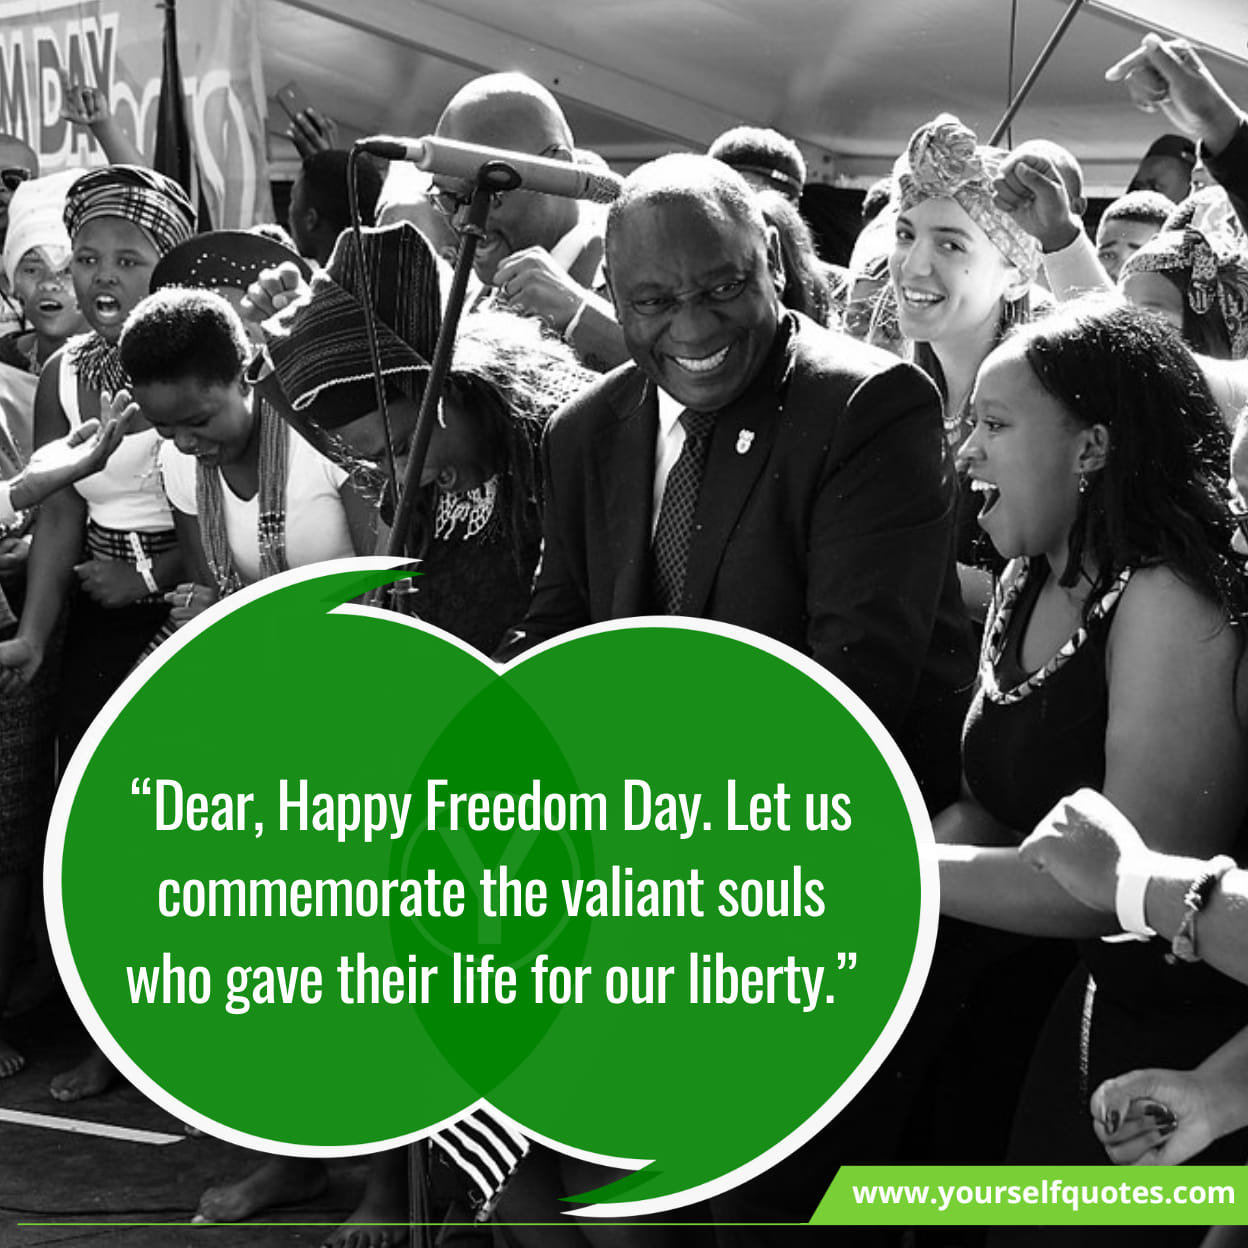 Wishes Sayings For Happy Freedom Day